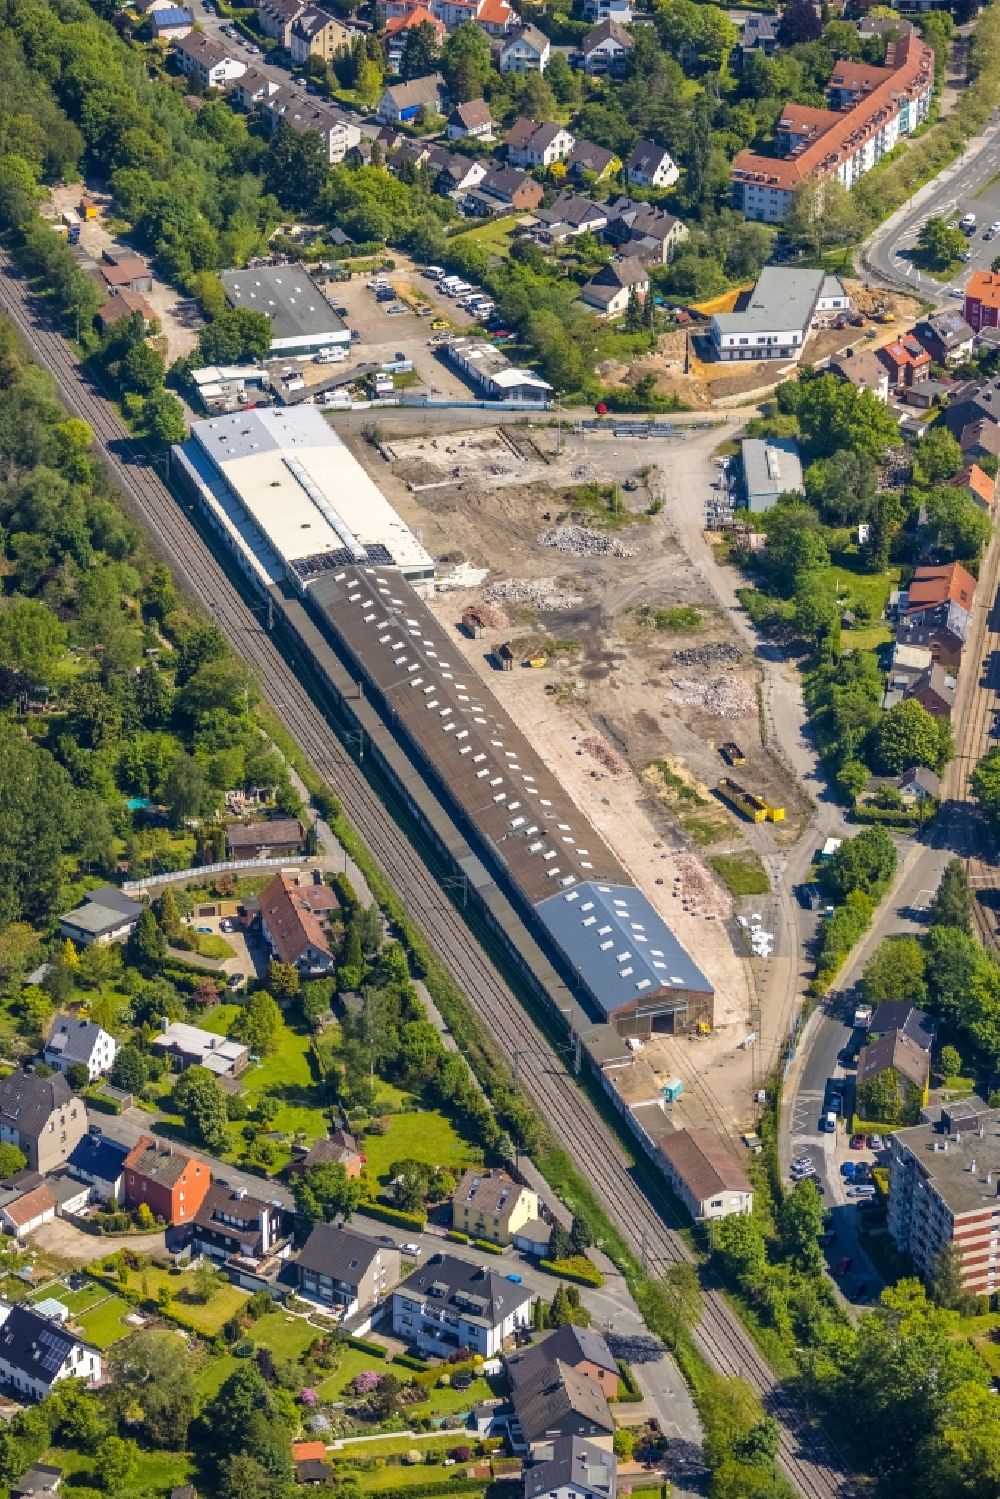 Dortmund from above - Construction site for City Quarters Building with living space for students of the Alte Gleisfabrik project on Krueckenweg in the district Krueckenweg in Dortmund at Ruhrgebiet in the state North Rhine-Westphalia, Germany